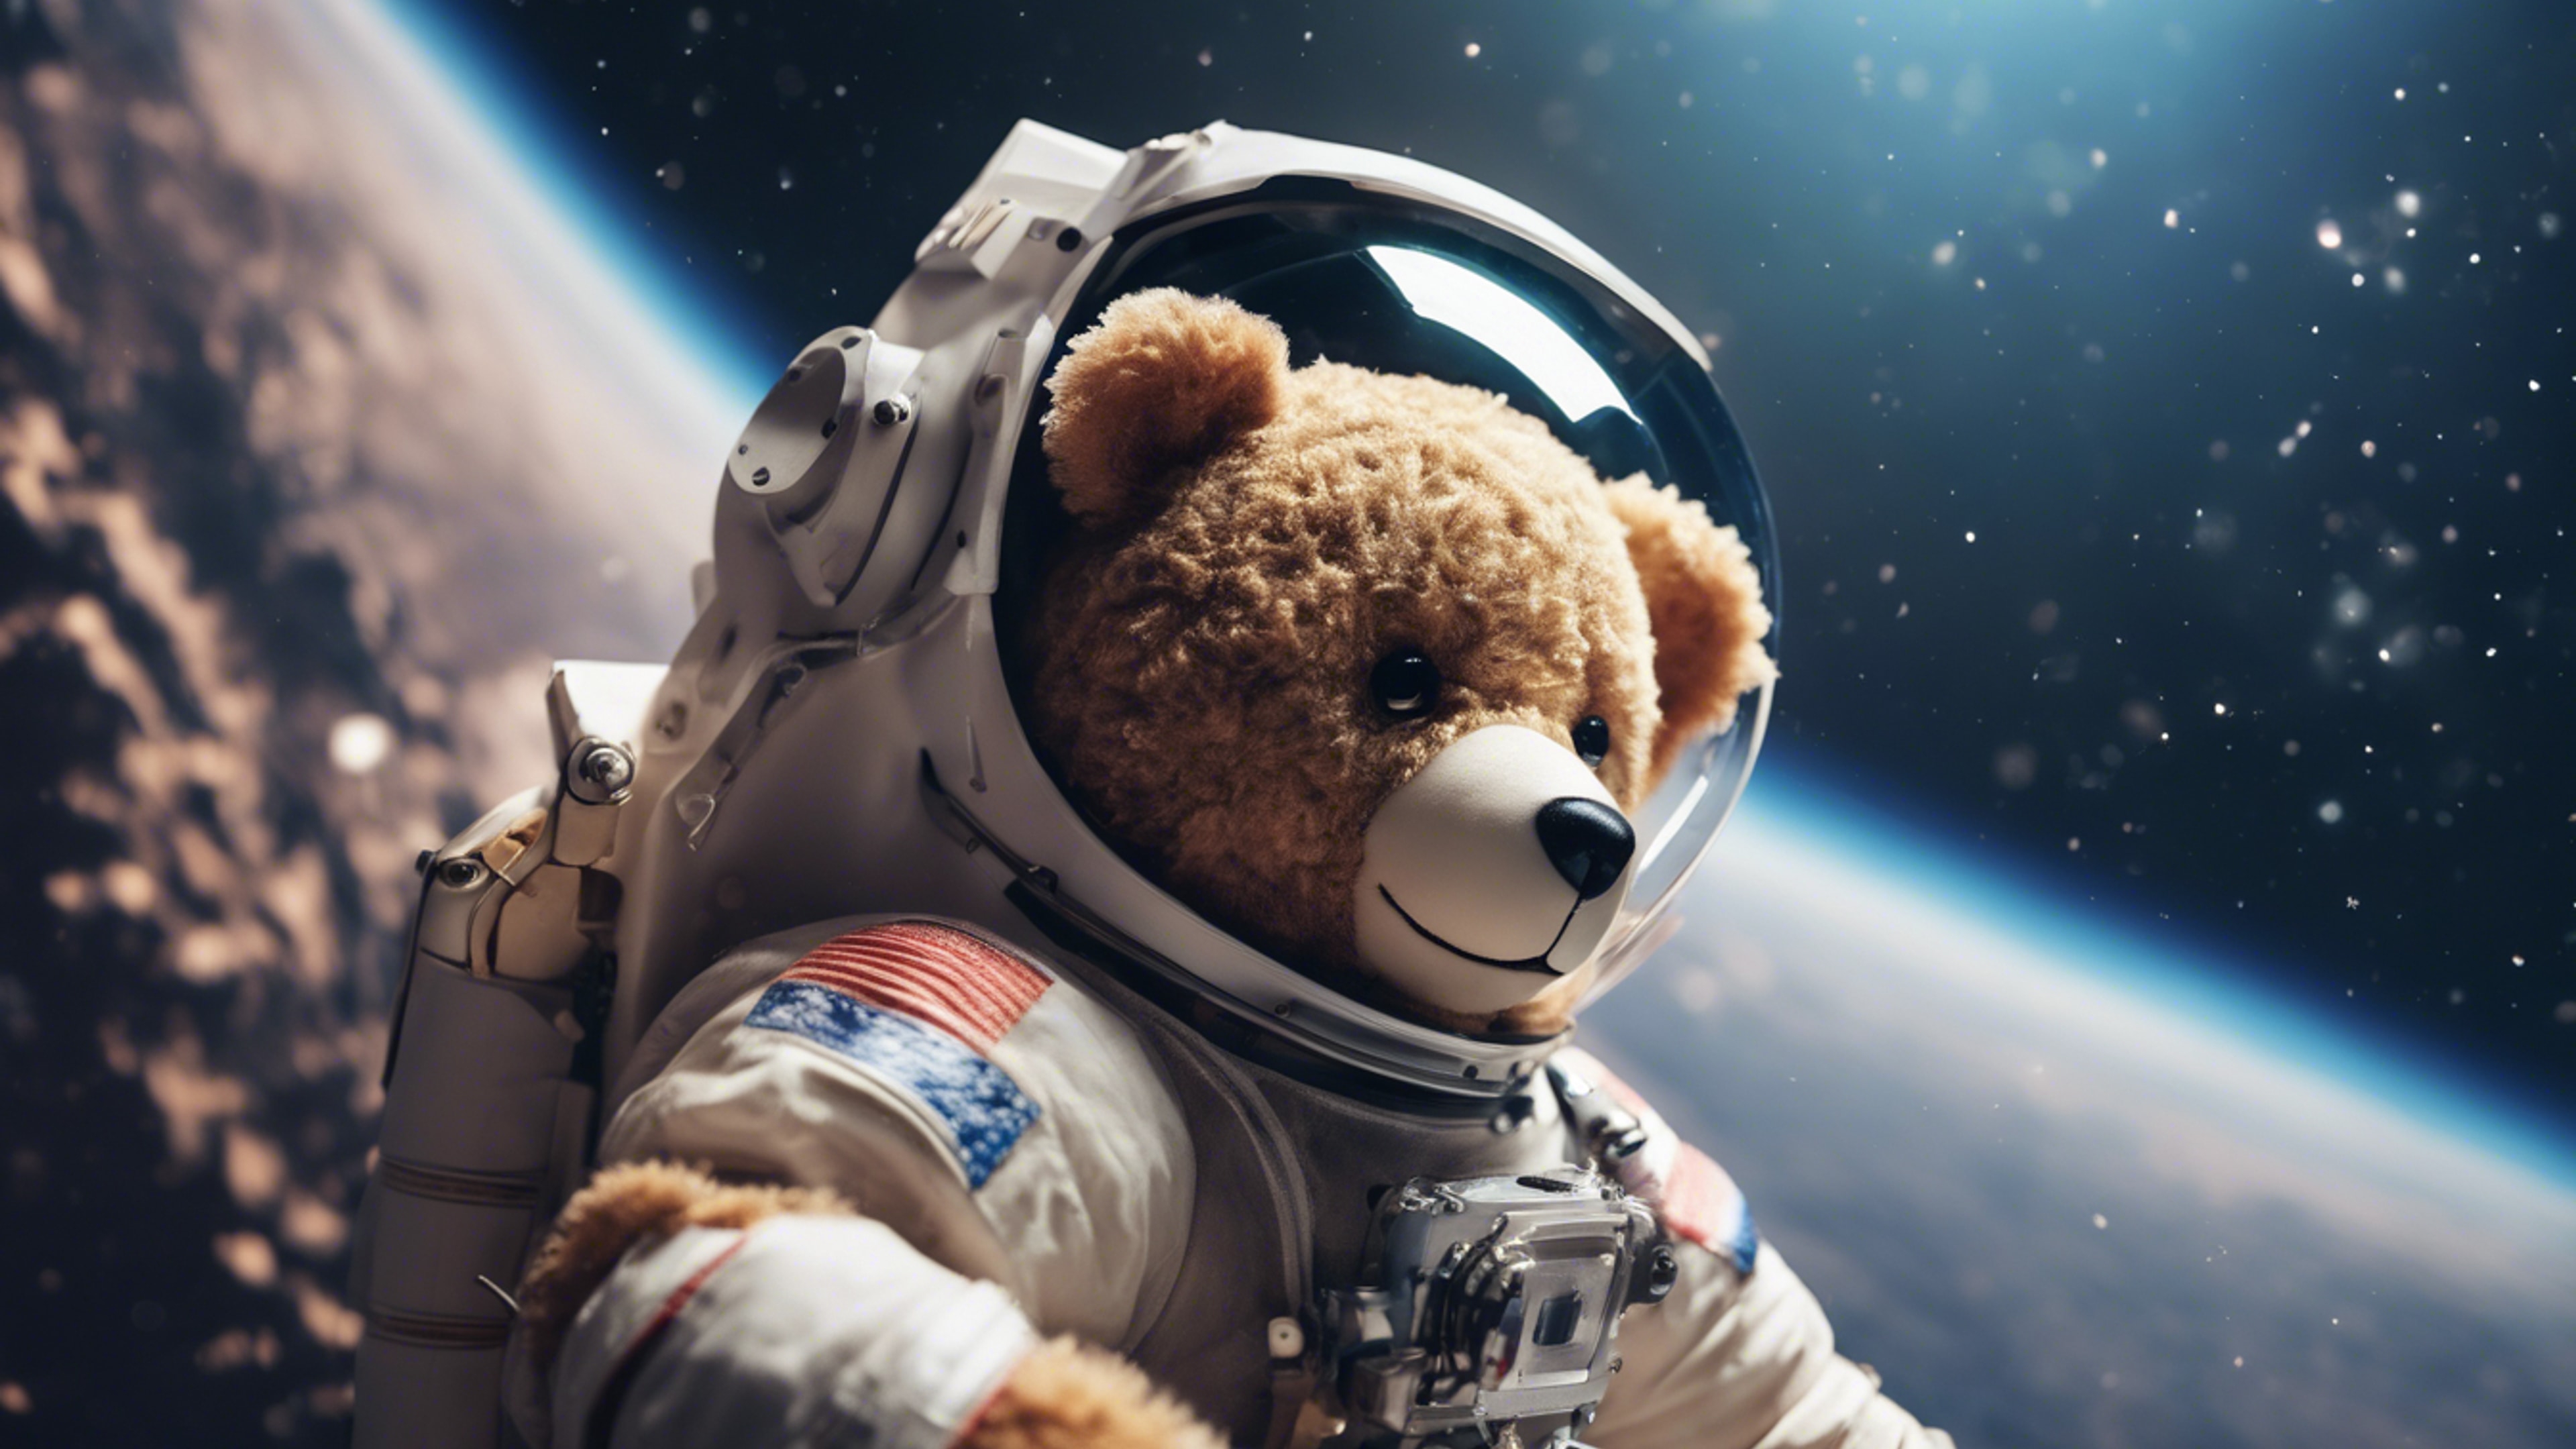 A teddy bear astronaut floating in space. Wallpaper[264e253f630141468c44]